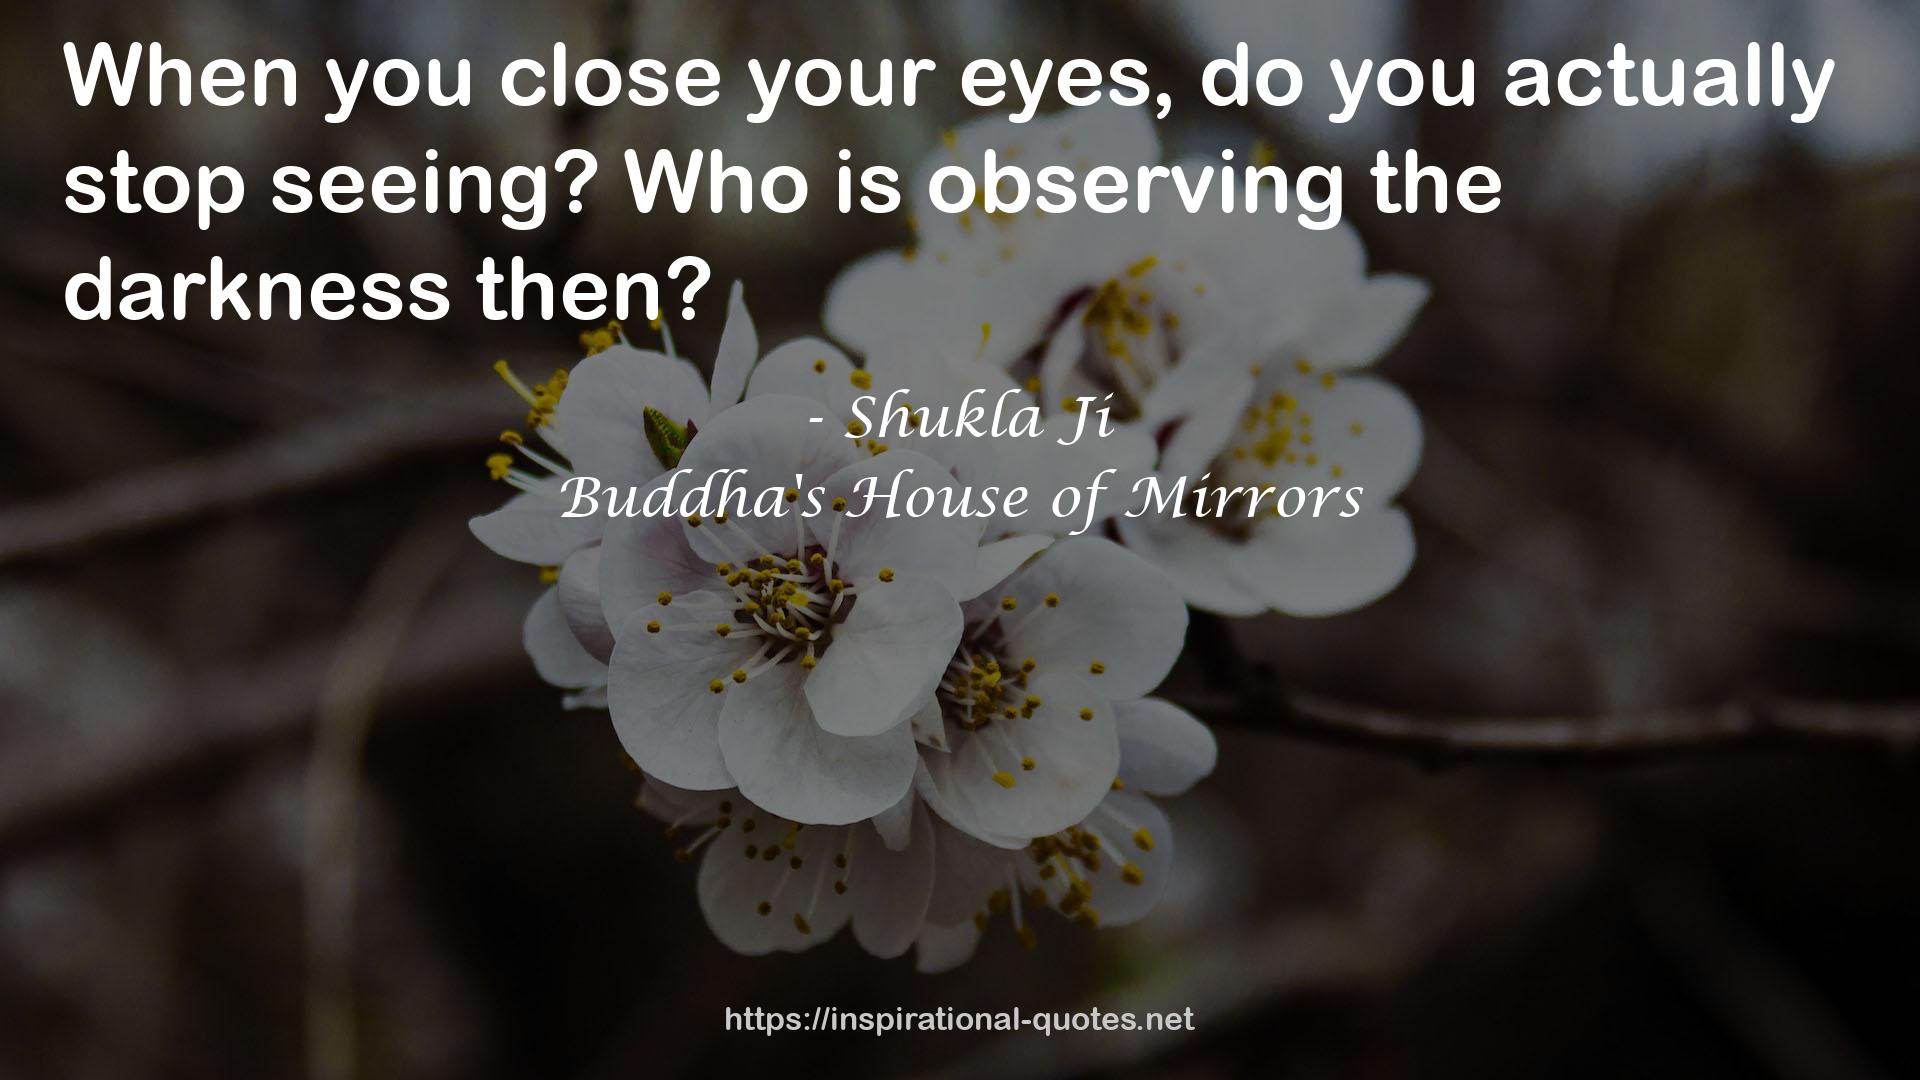 Buddha's House of Mirrors QUOTES